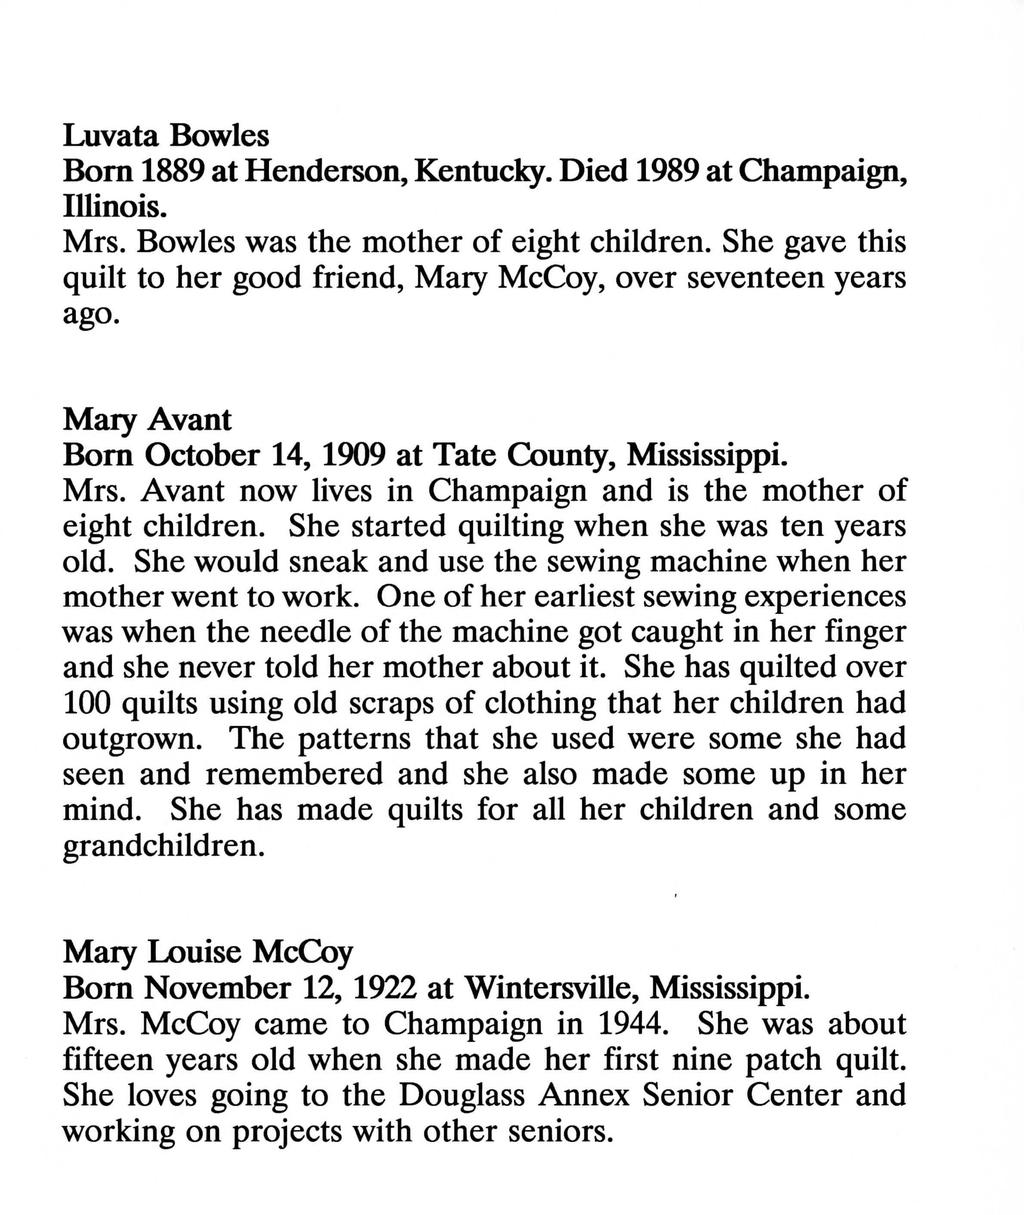 Luvata Bowles Born 1889 at Henderson, Kentucky. Died 1989 at Champaign, Illinois. Mrs. Bowles was the mother of eight children.